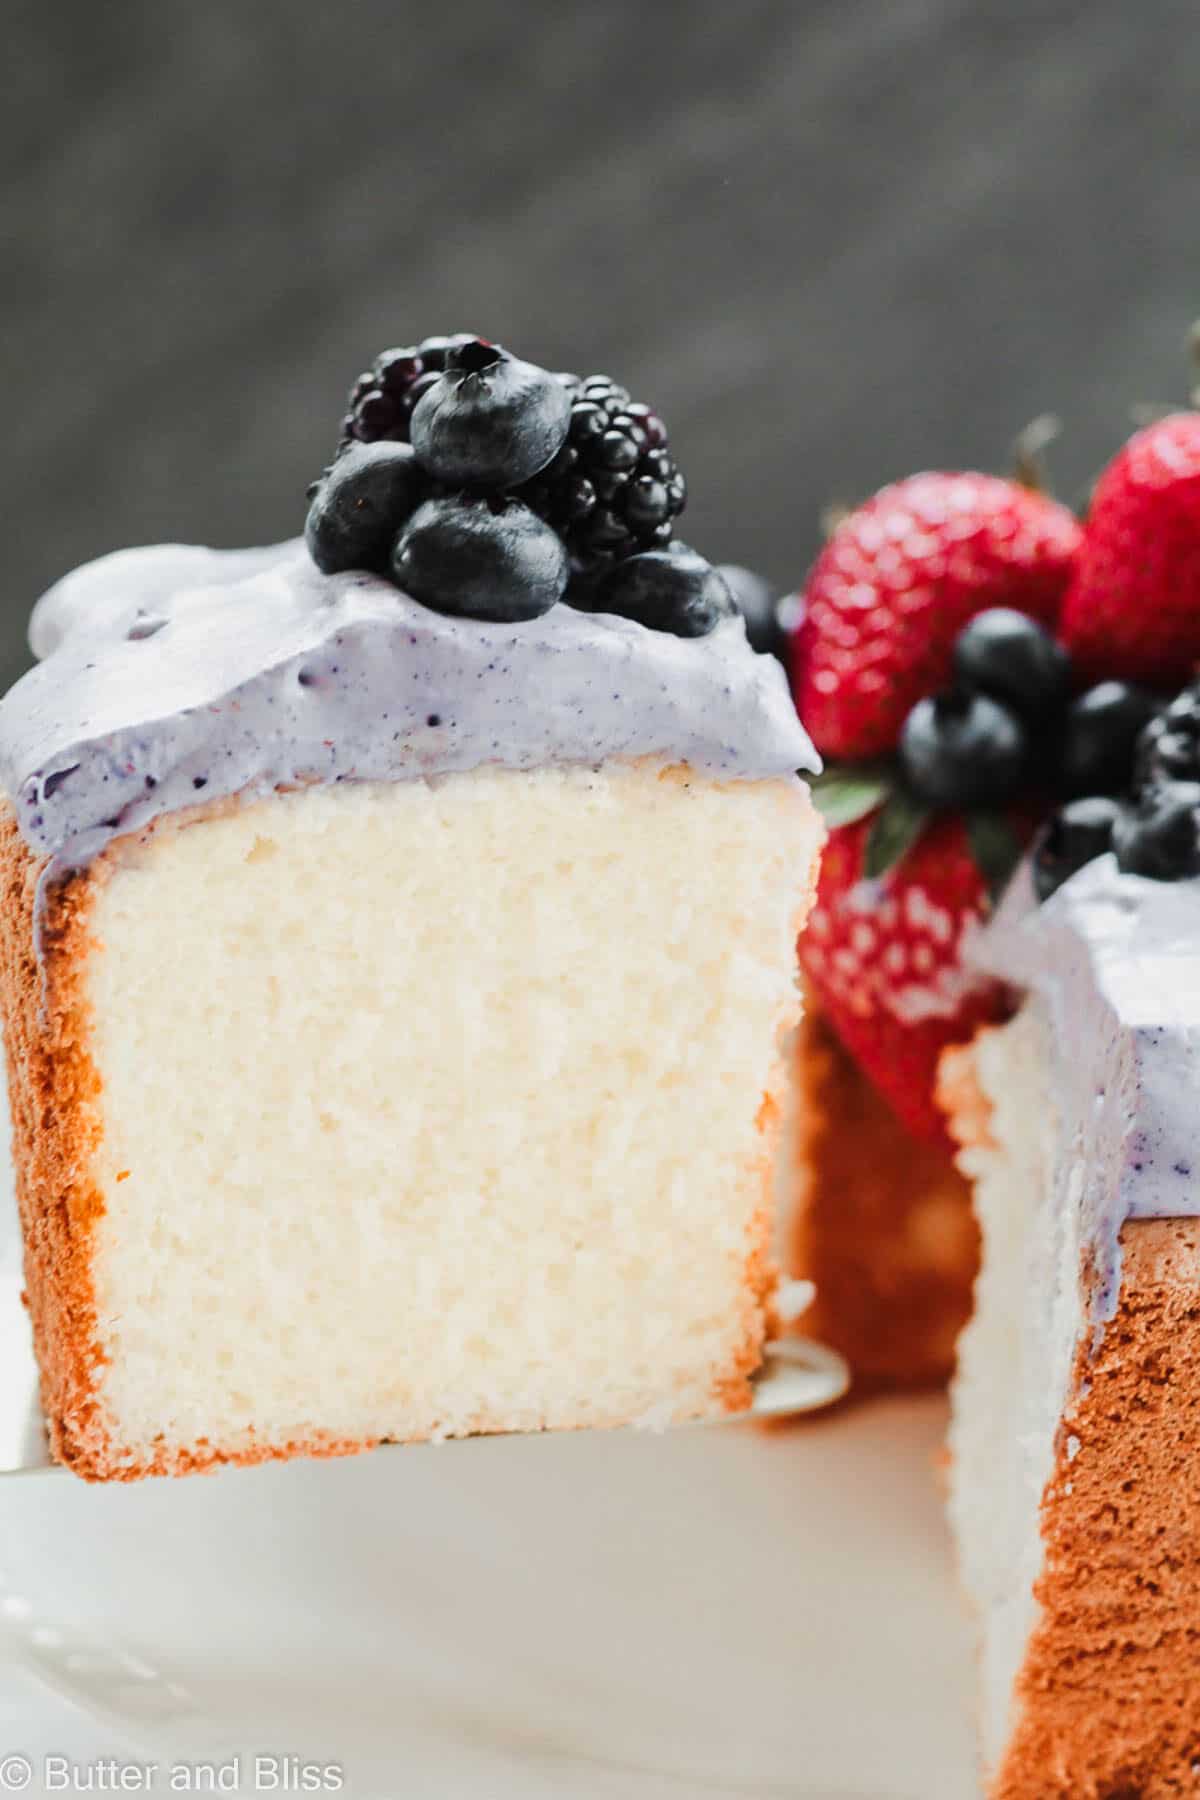 Side view of a slice of angel food cake on a cake server